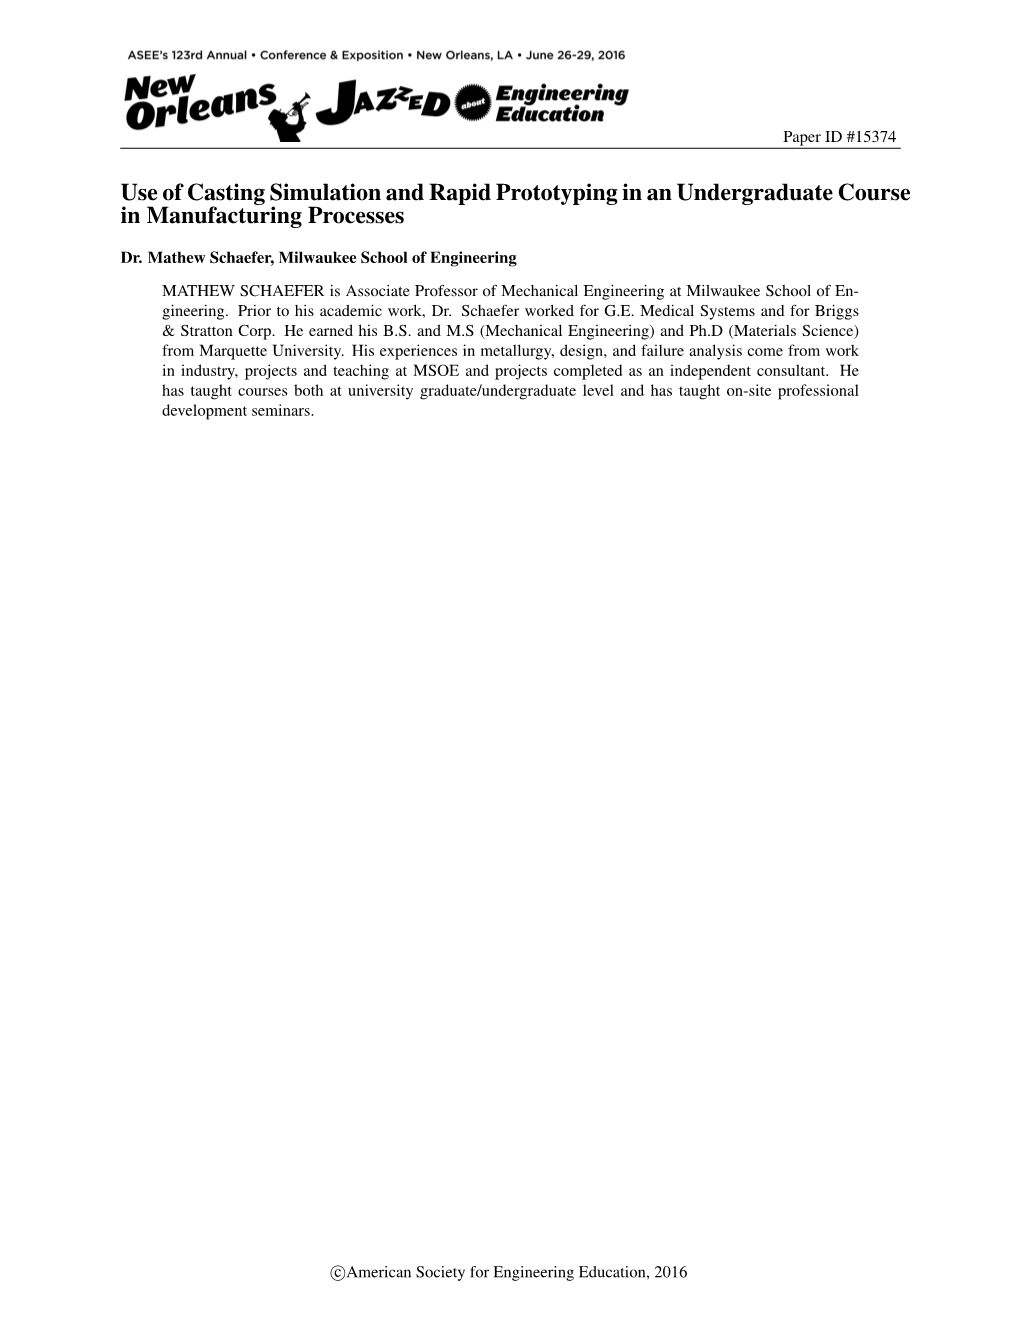 Use of Casting Simulation and Rapid Prototyping in an Undergraduate Course in Manufacturing Processes